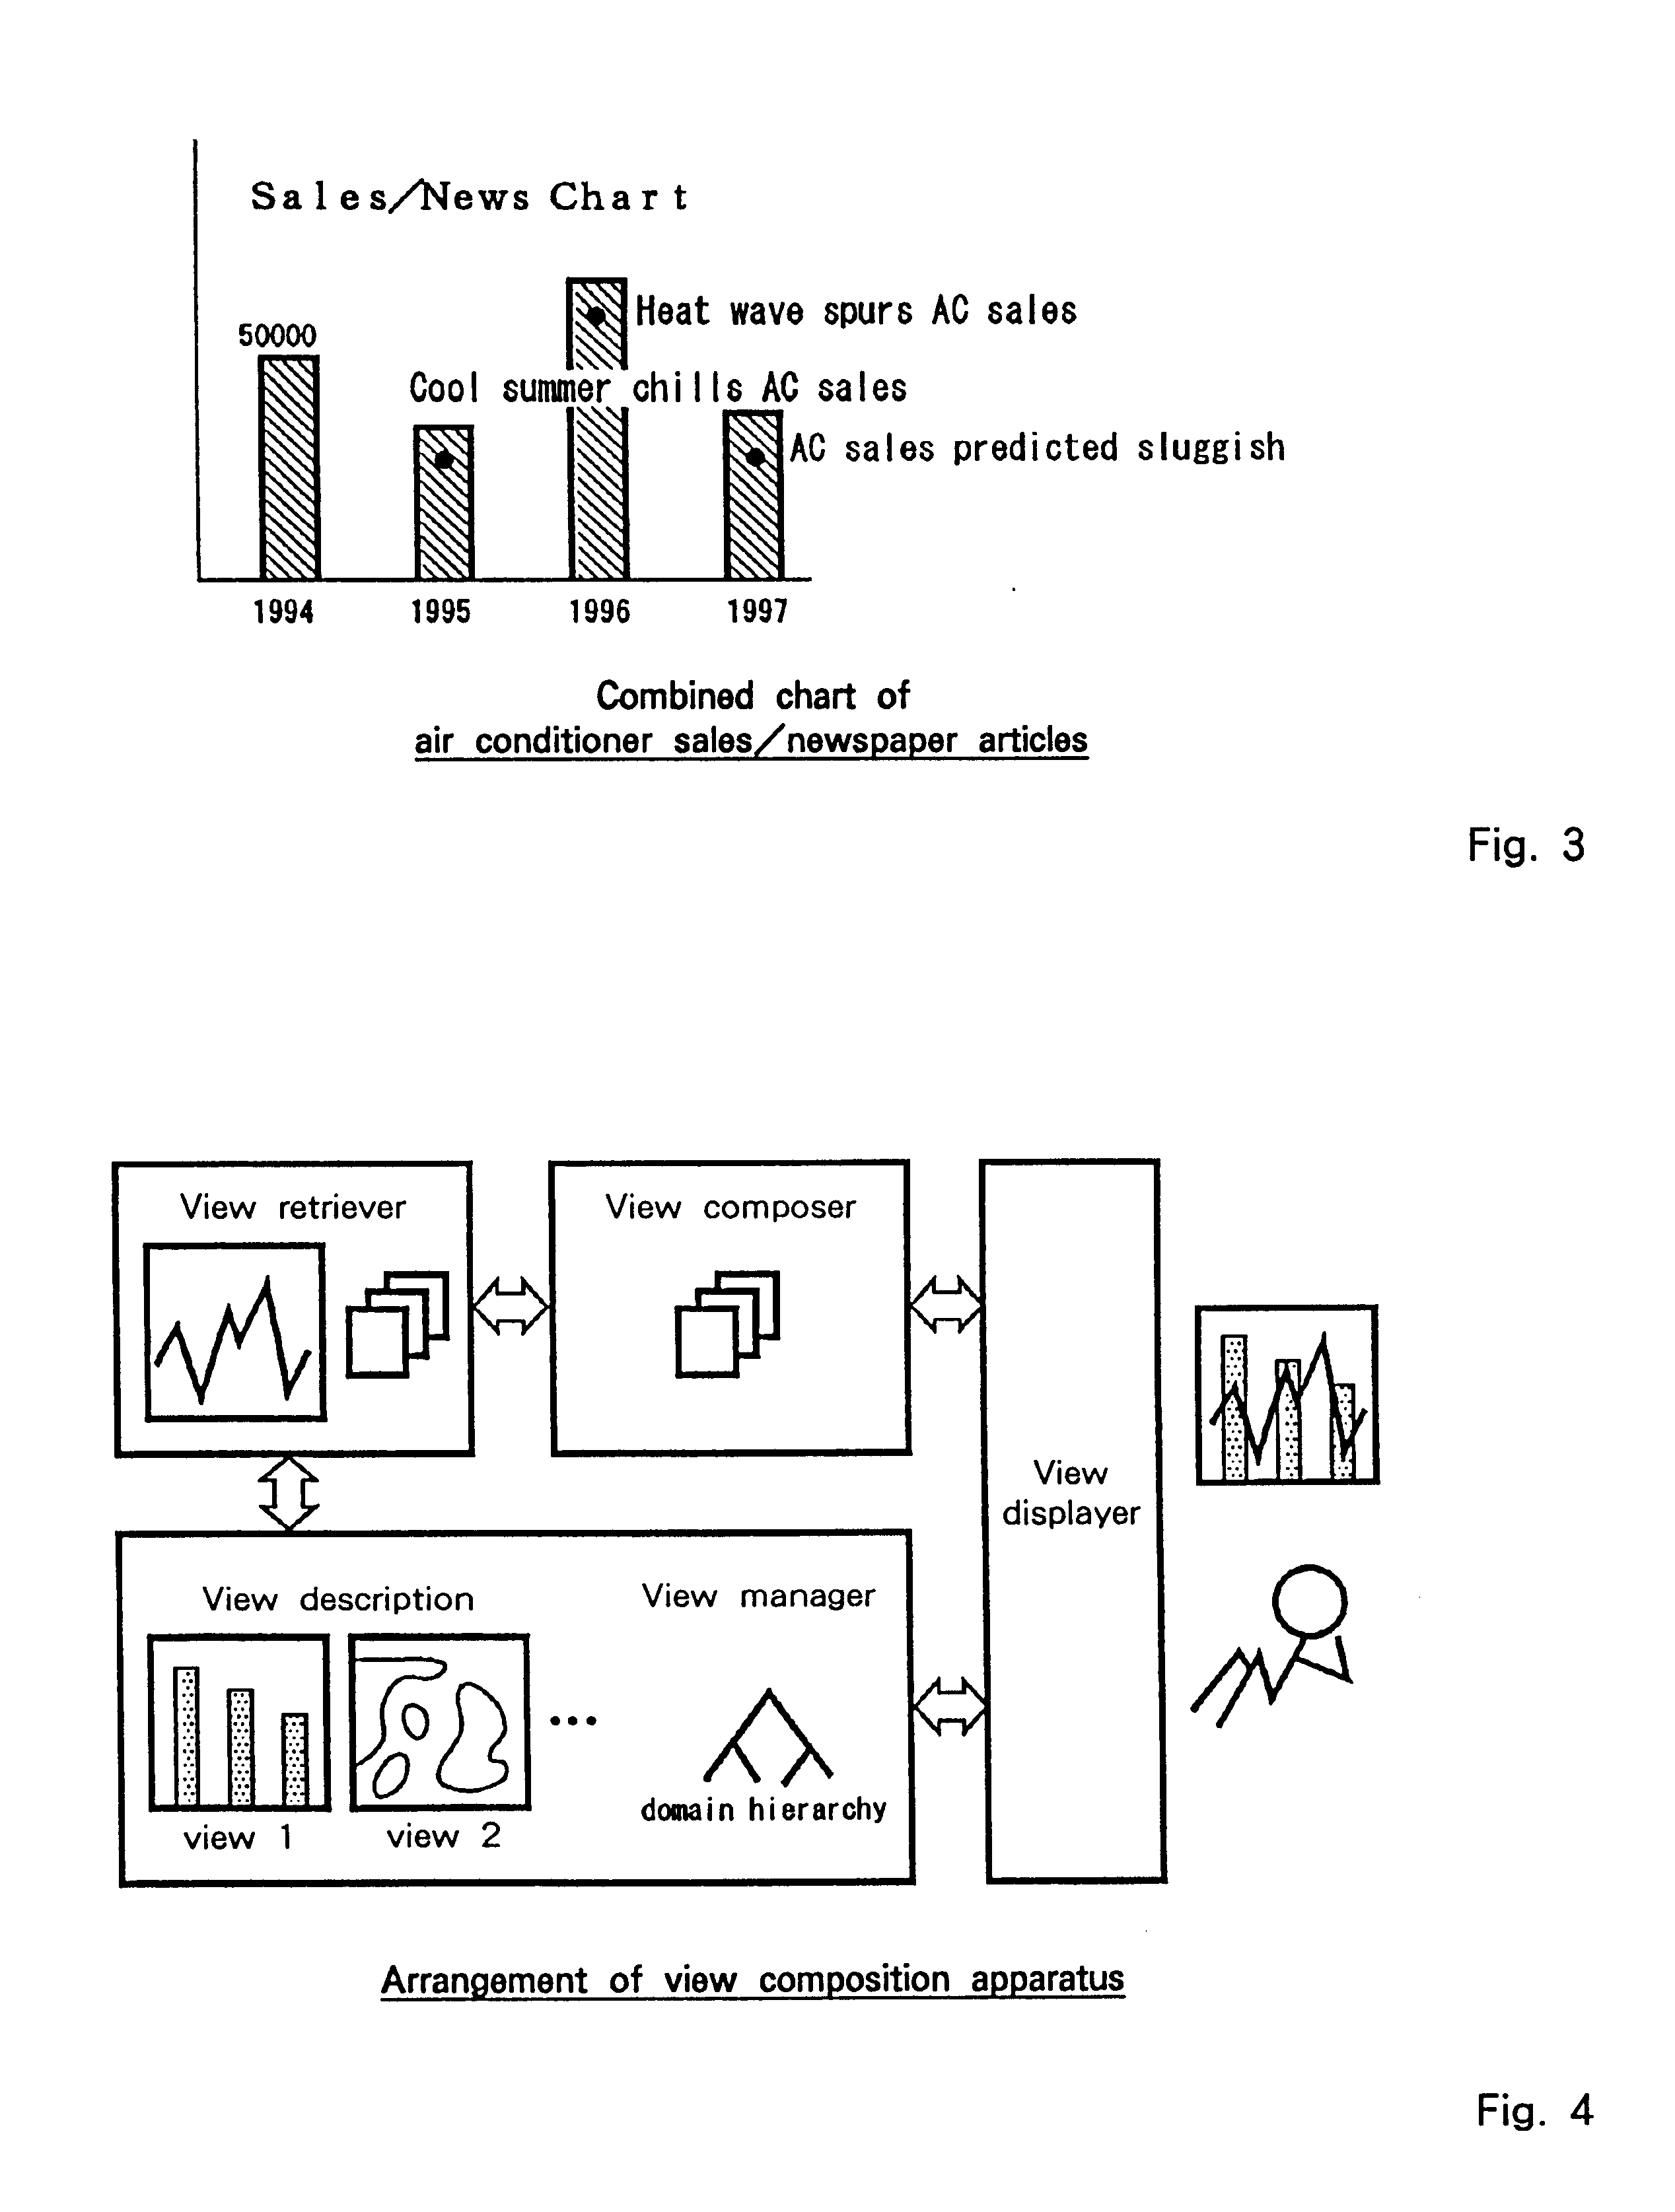 View composition system for synthesizing multiple visual representations of multiple data sets